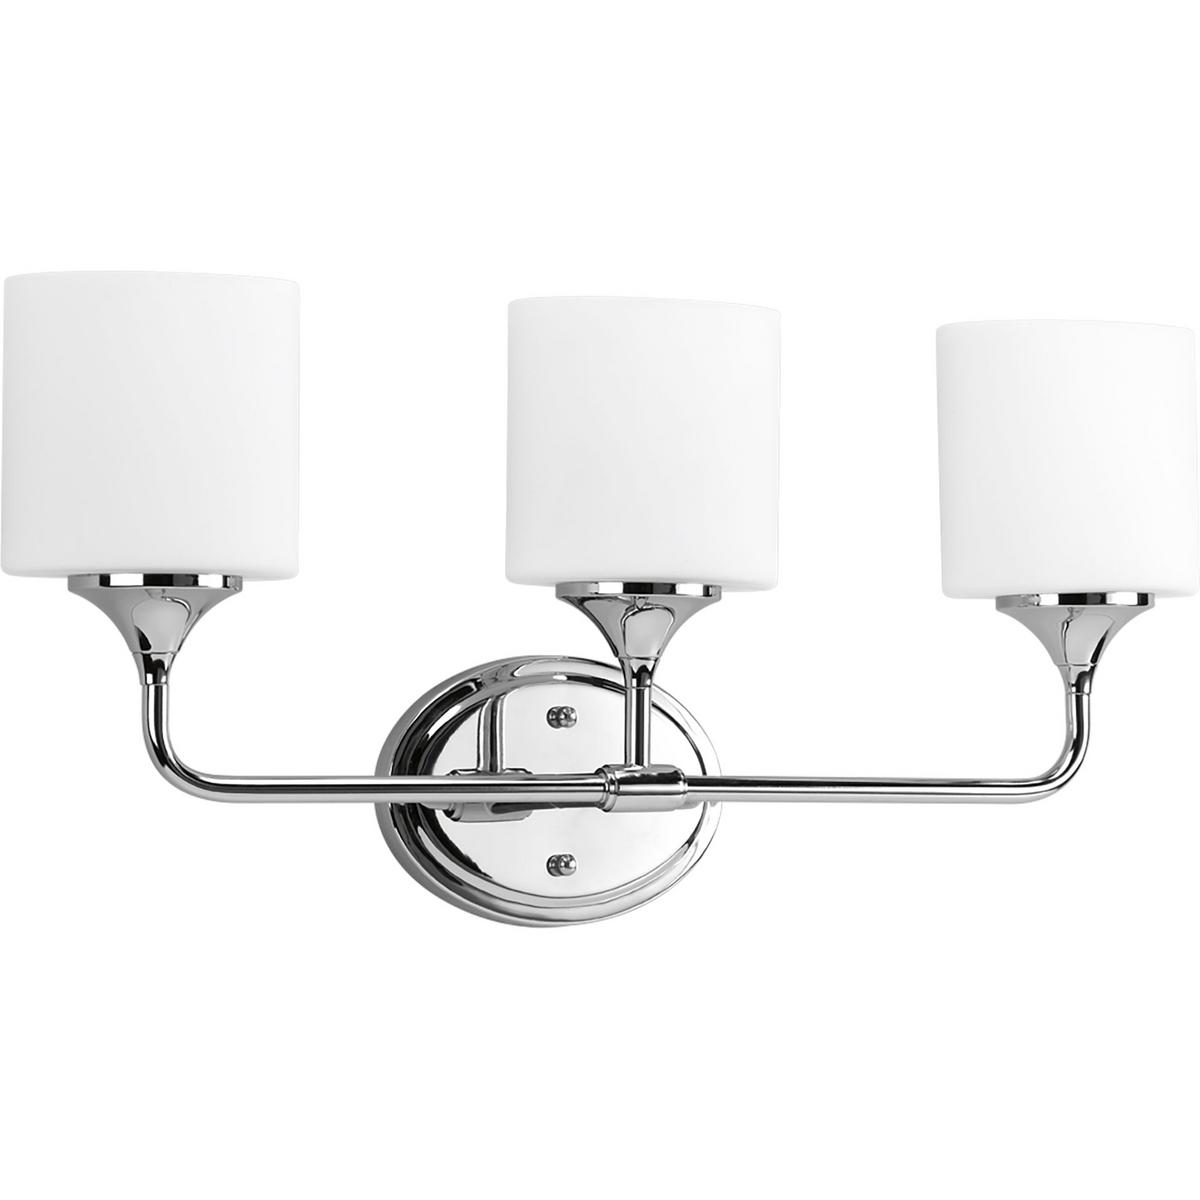 Hubbell P2803-15 With a youthful, yet timeless flair, the Lynzie Collection brightens your day with its simplicity. This three-light bath fixture with etched, white, oval shaped glass shades held upright by delicate classic Chrome finished arms portray the simple styling.